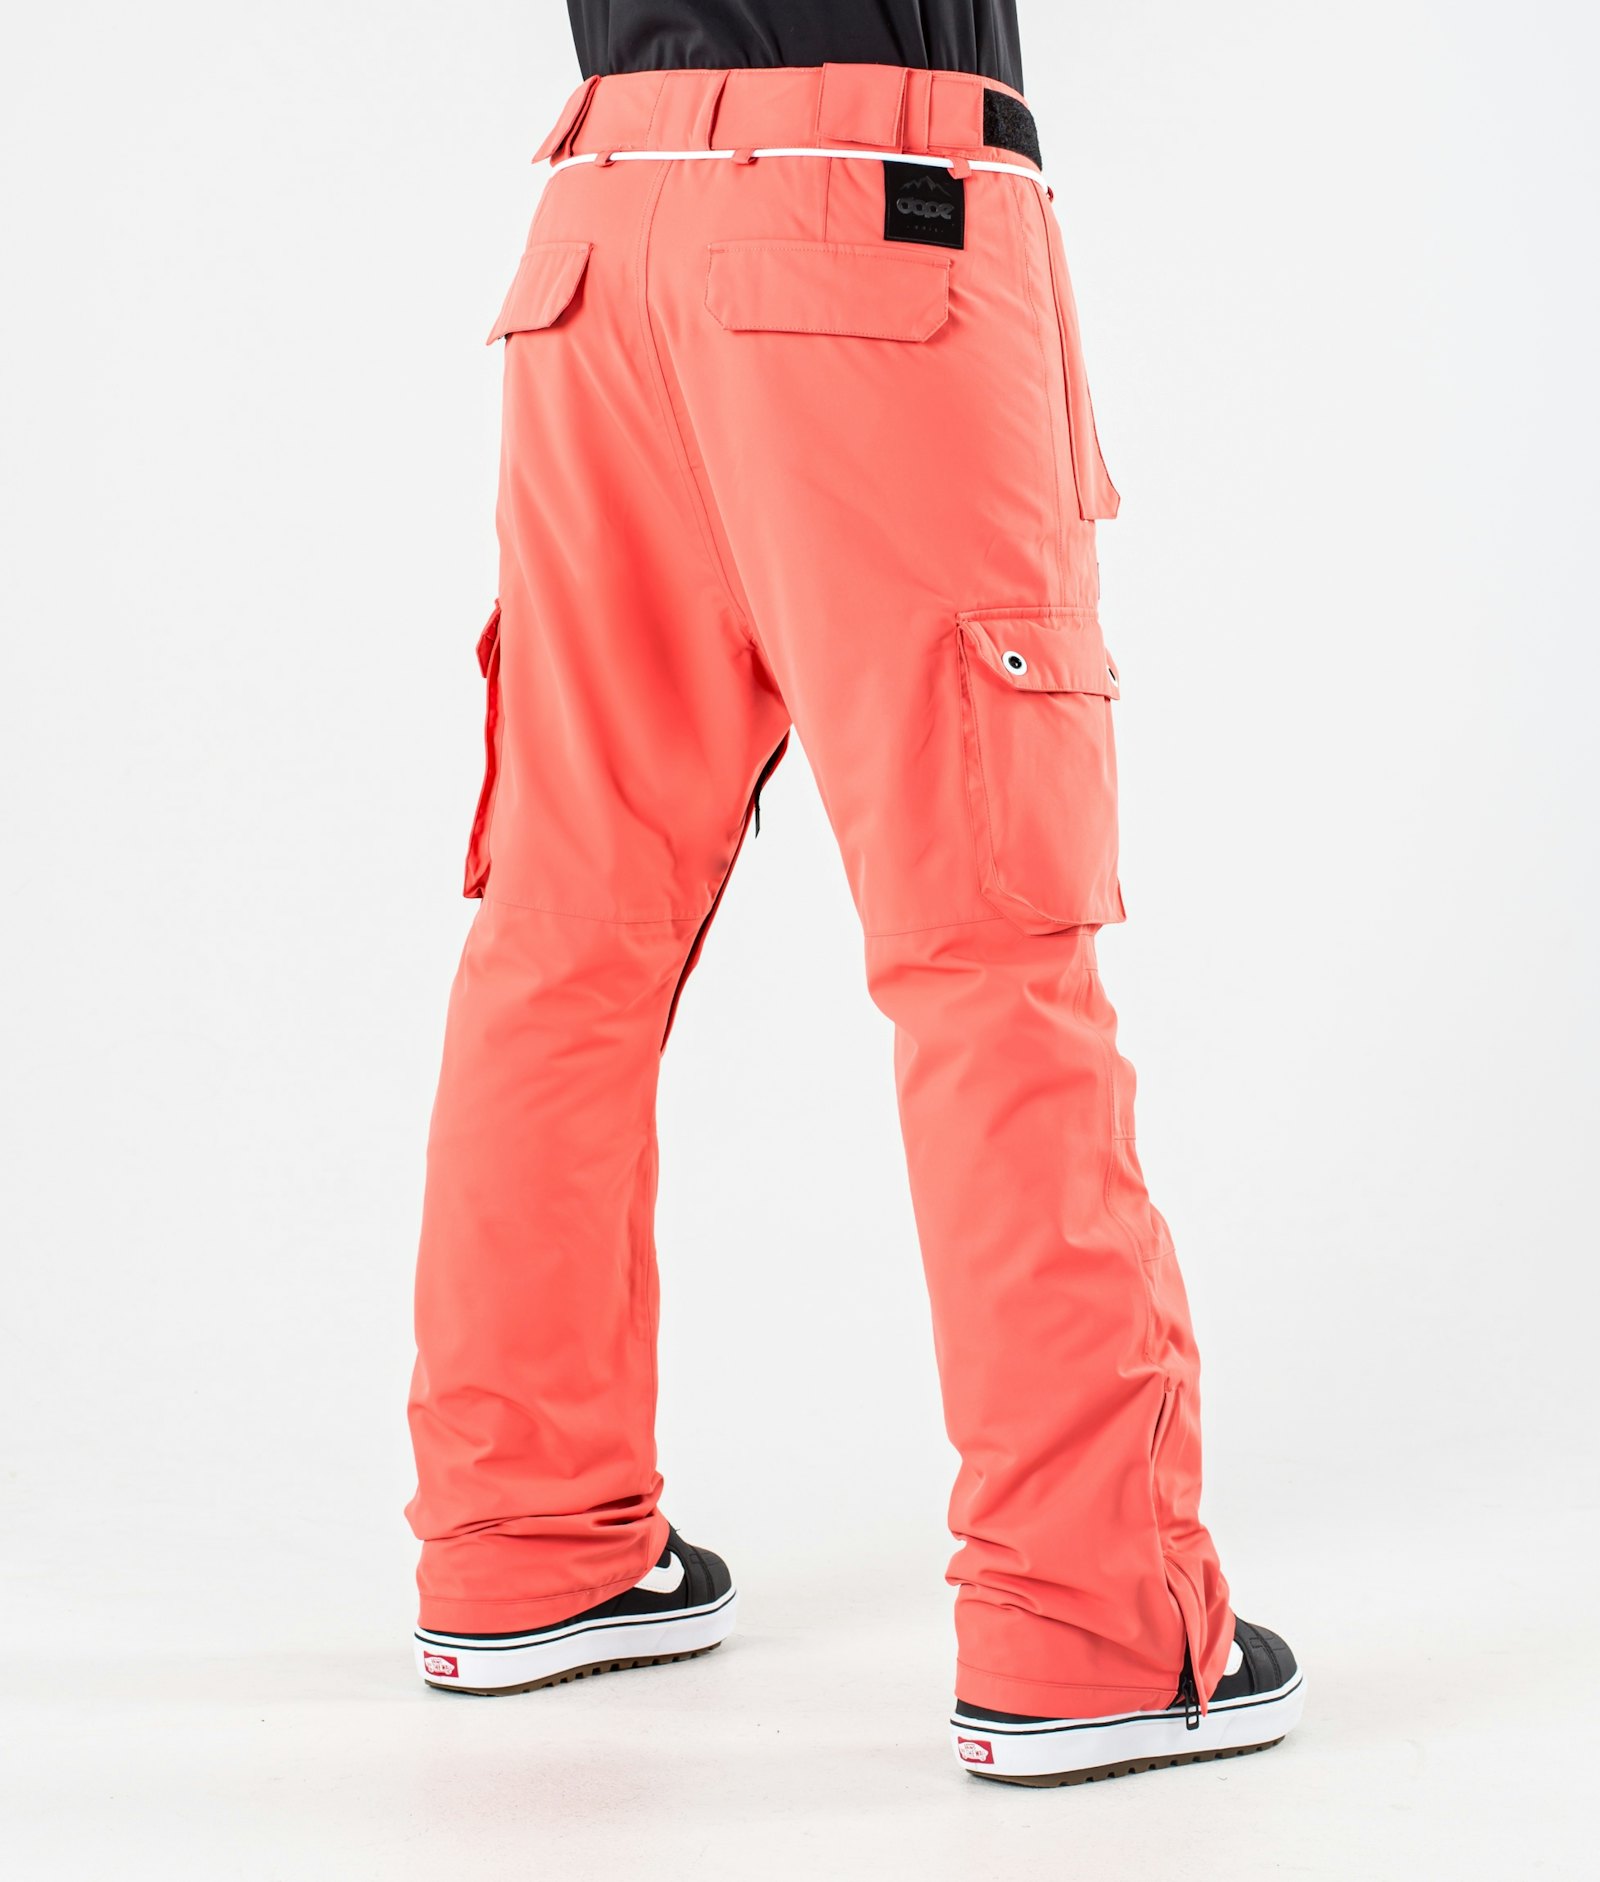 Iconic W 2020 Snowboard Bukser Dame Coral